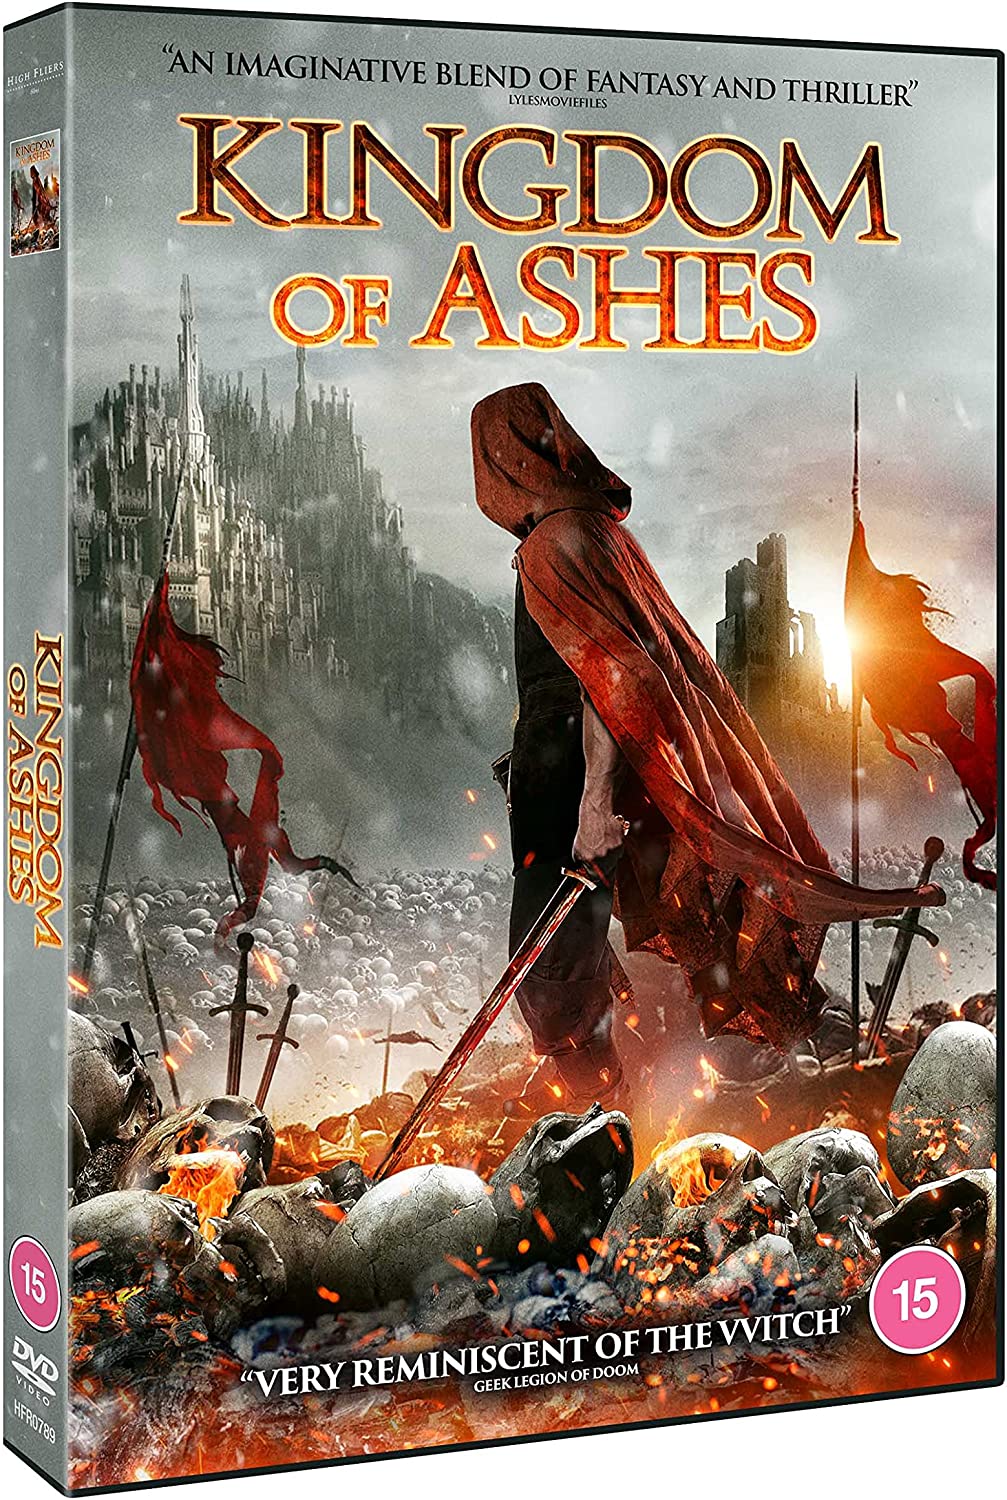 Kingdom of Ashes - War/Action [DVD]